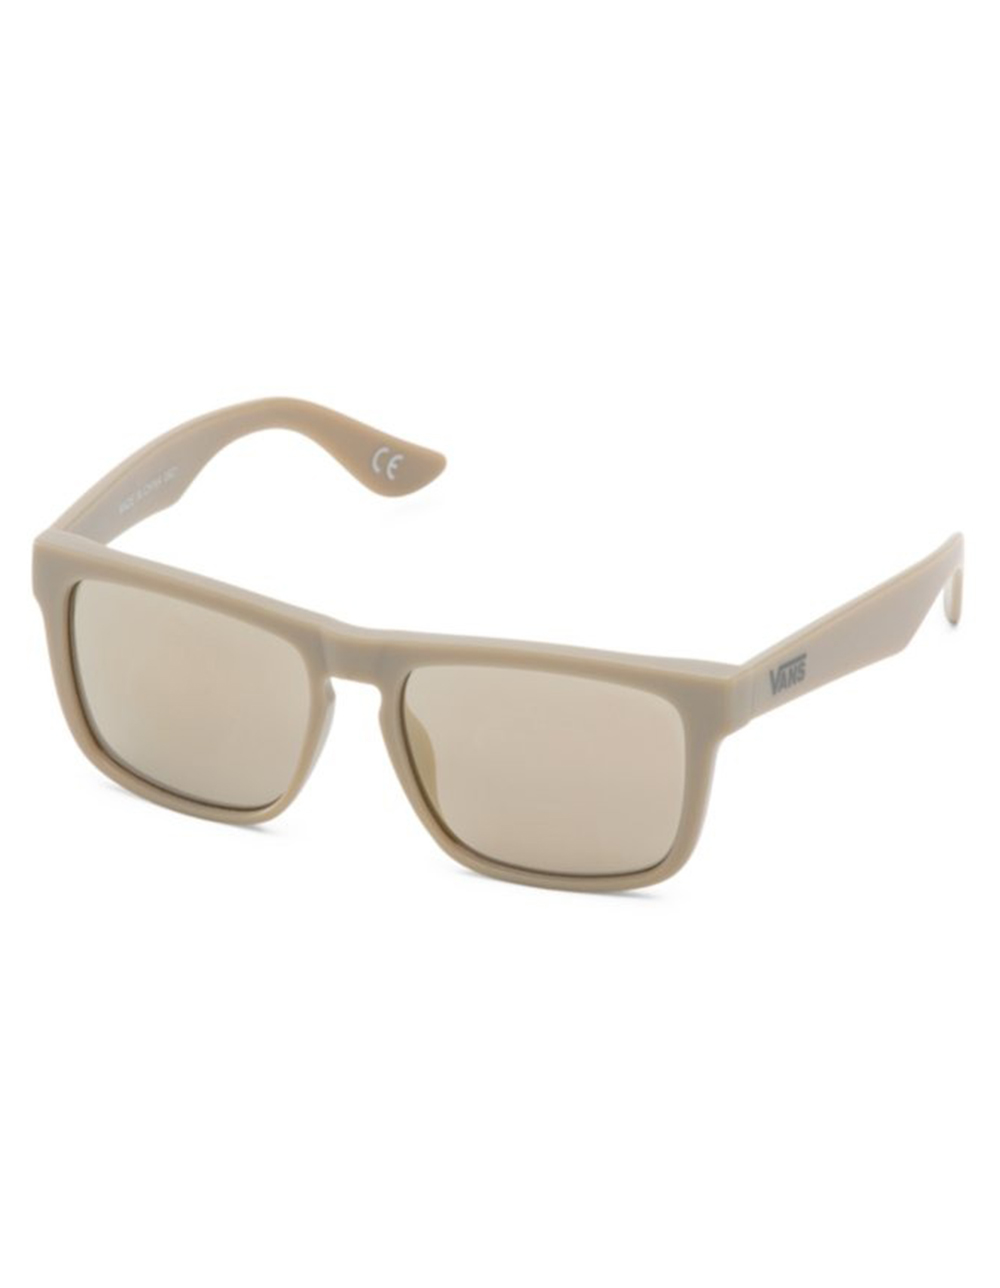 VANS Squared Off Sunglasses TAUPE - | Tillys